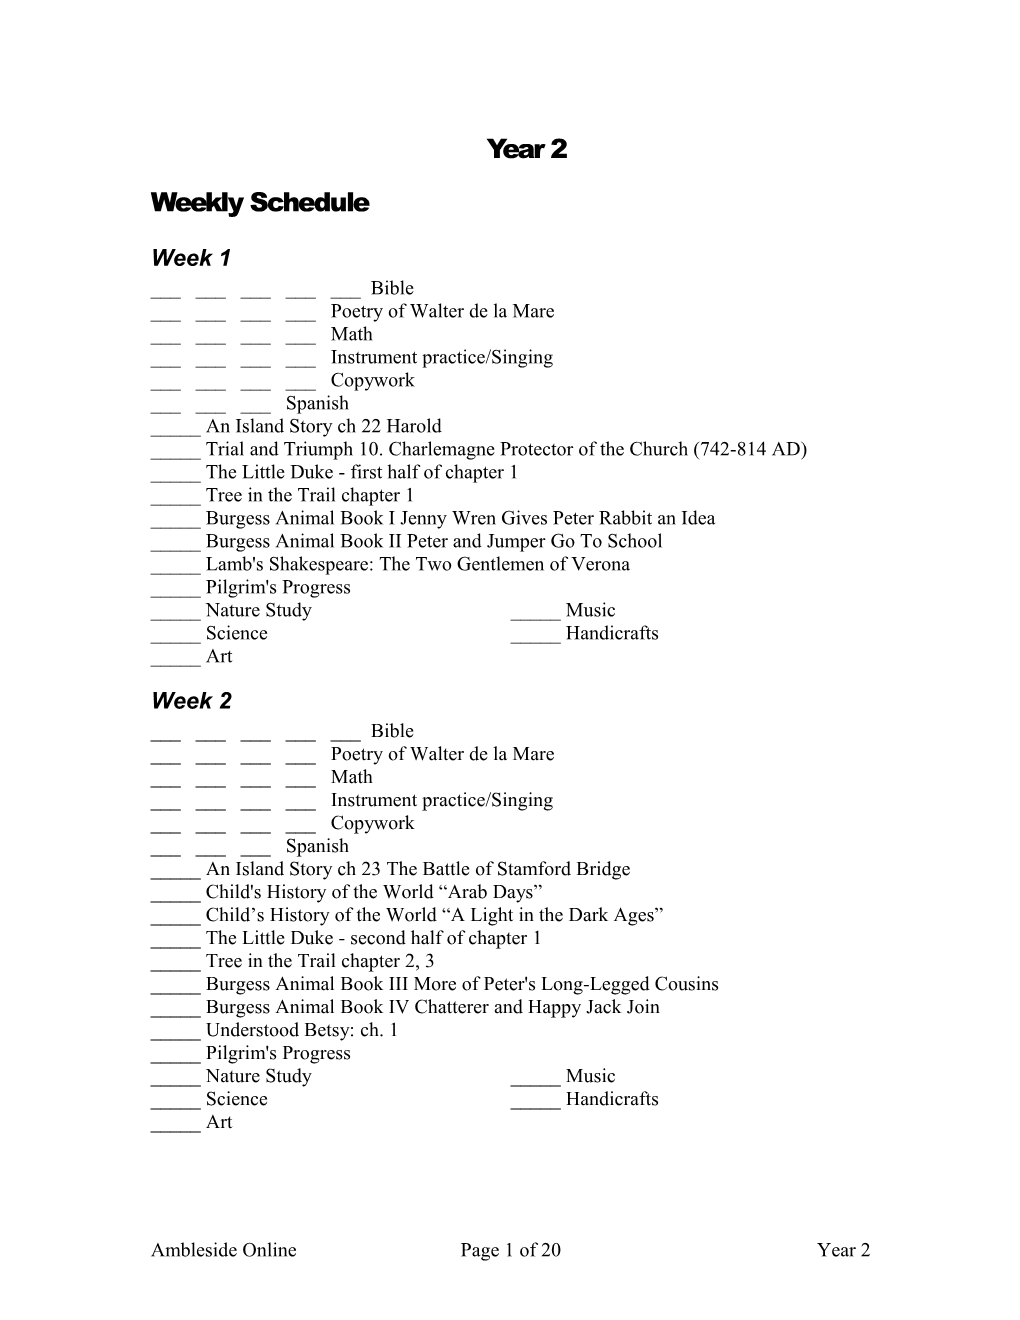 To This Book Schedule Should Be Added Daily Penmanship, Phonics, and Math, As Well As Weekly